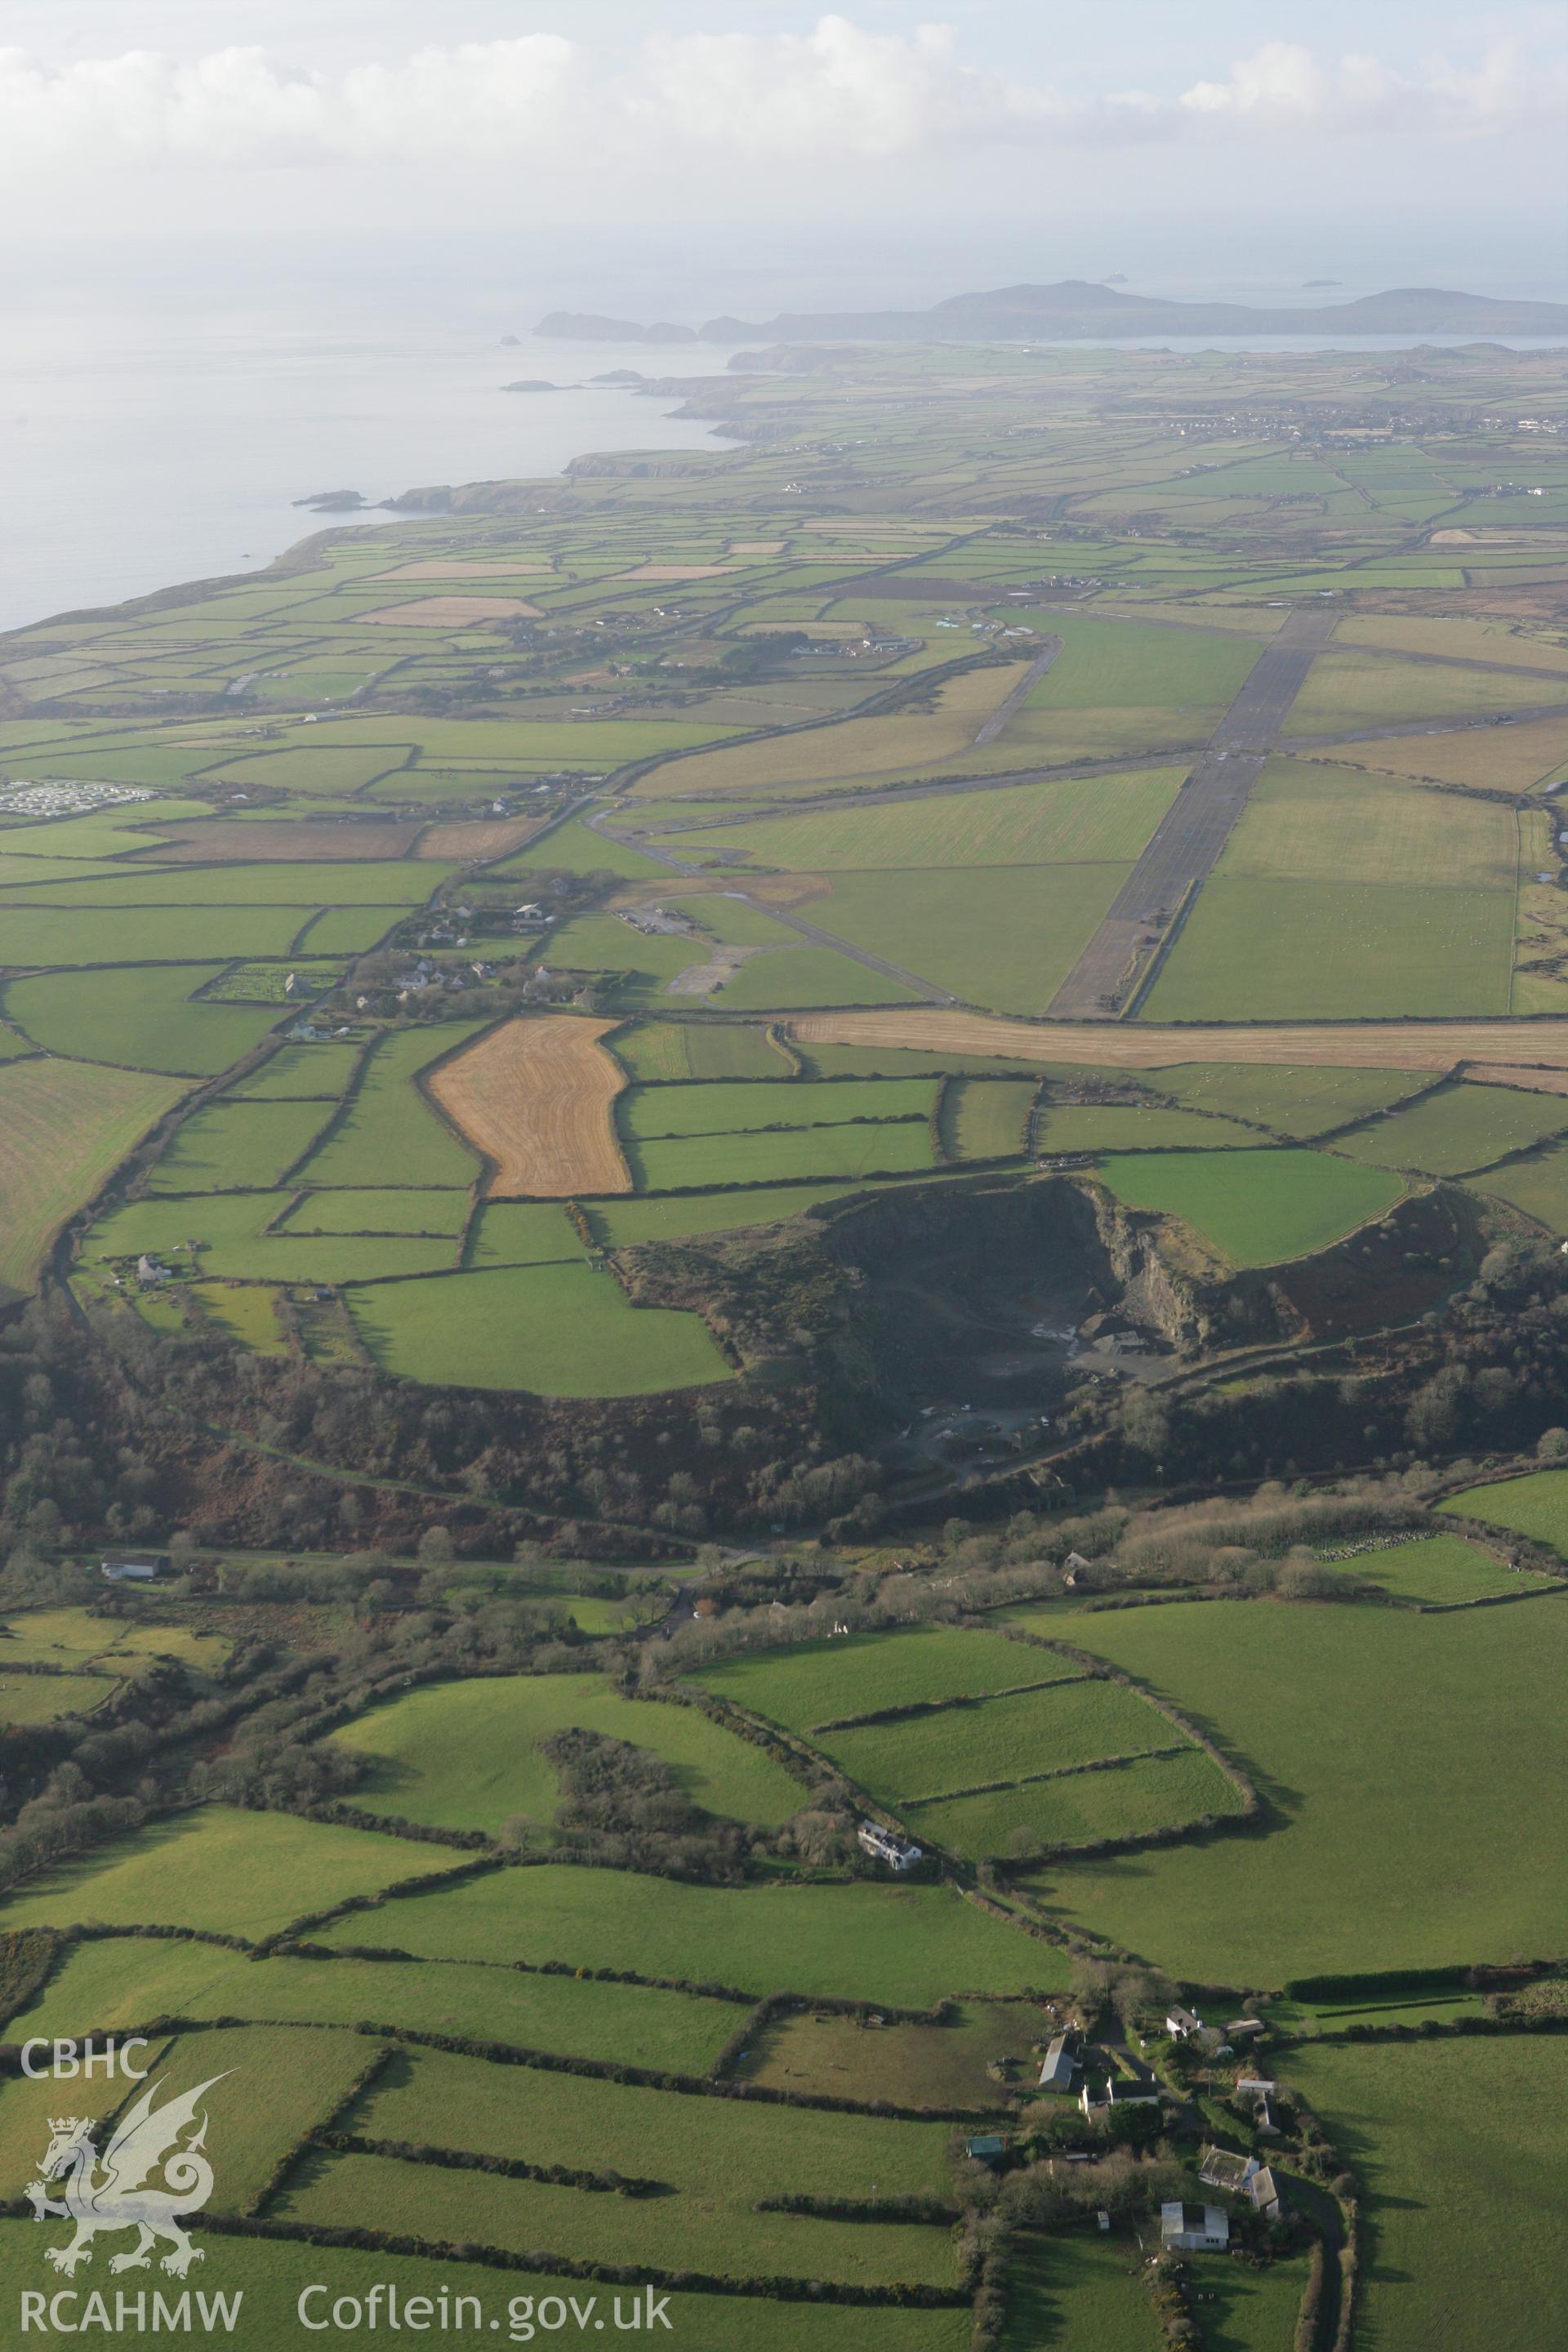 RCAHMW colour oblique photograph of St David's Airfield, Solva. Taken by Toby Driver on 15/12/2008.